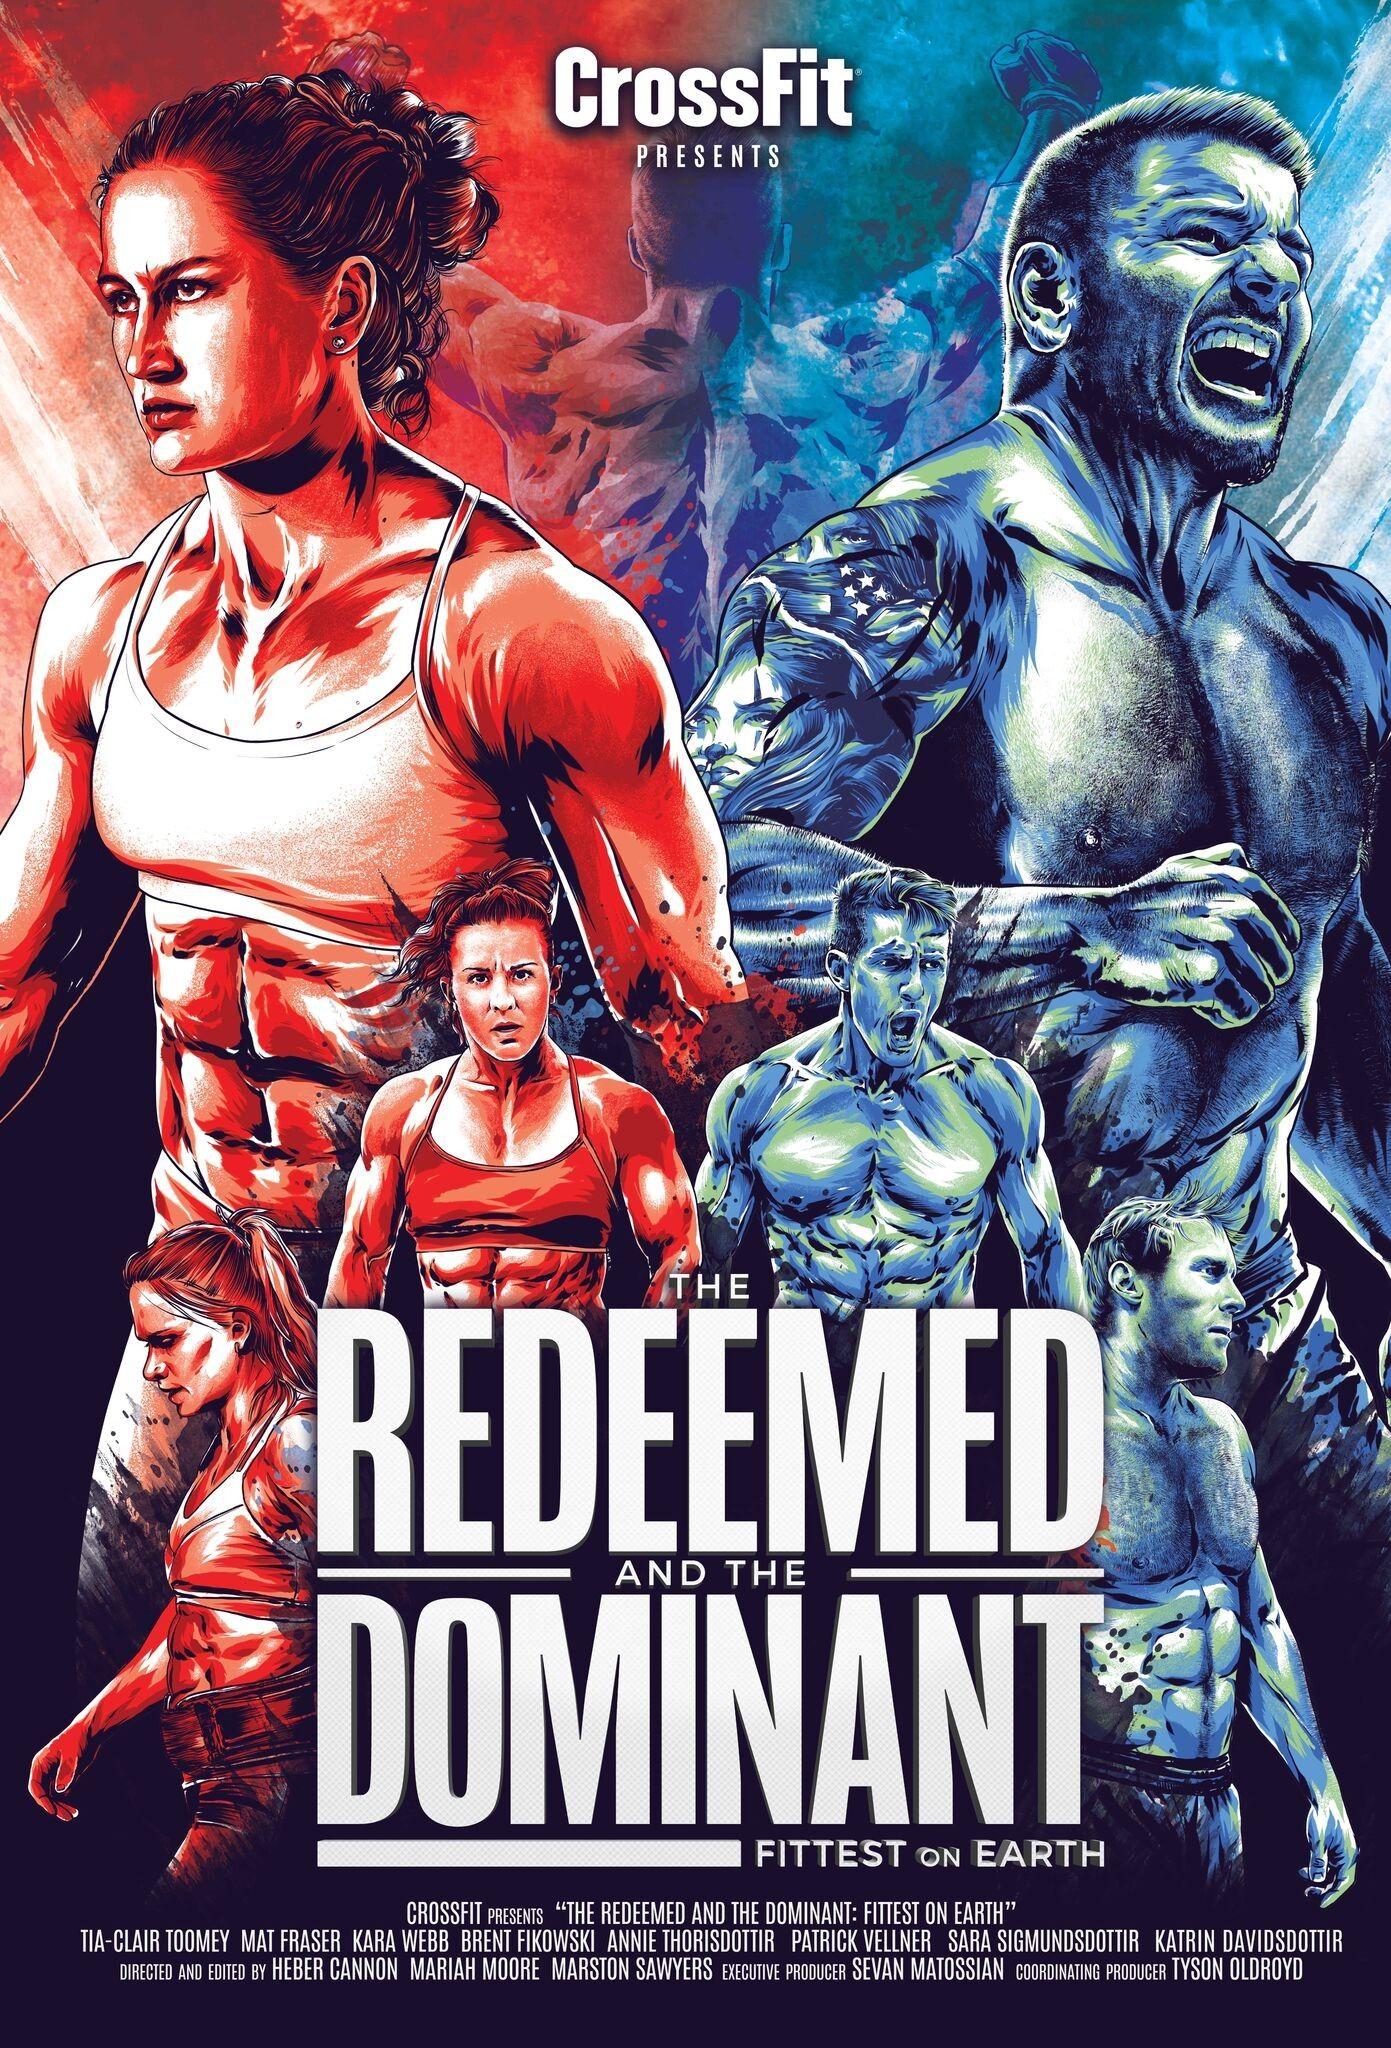 The Redeemed and the Dominant: Fittest on Earth. Crossfit